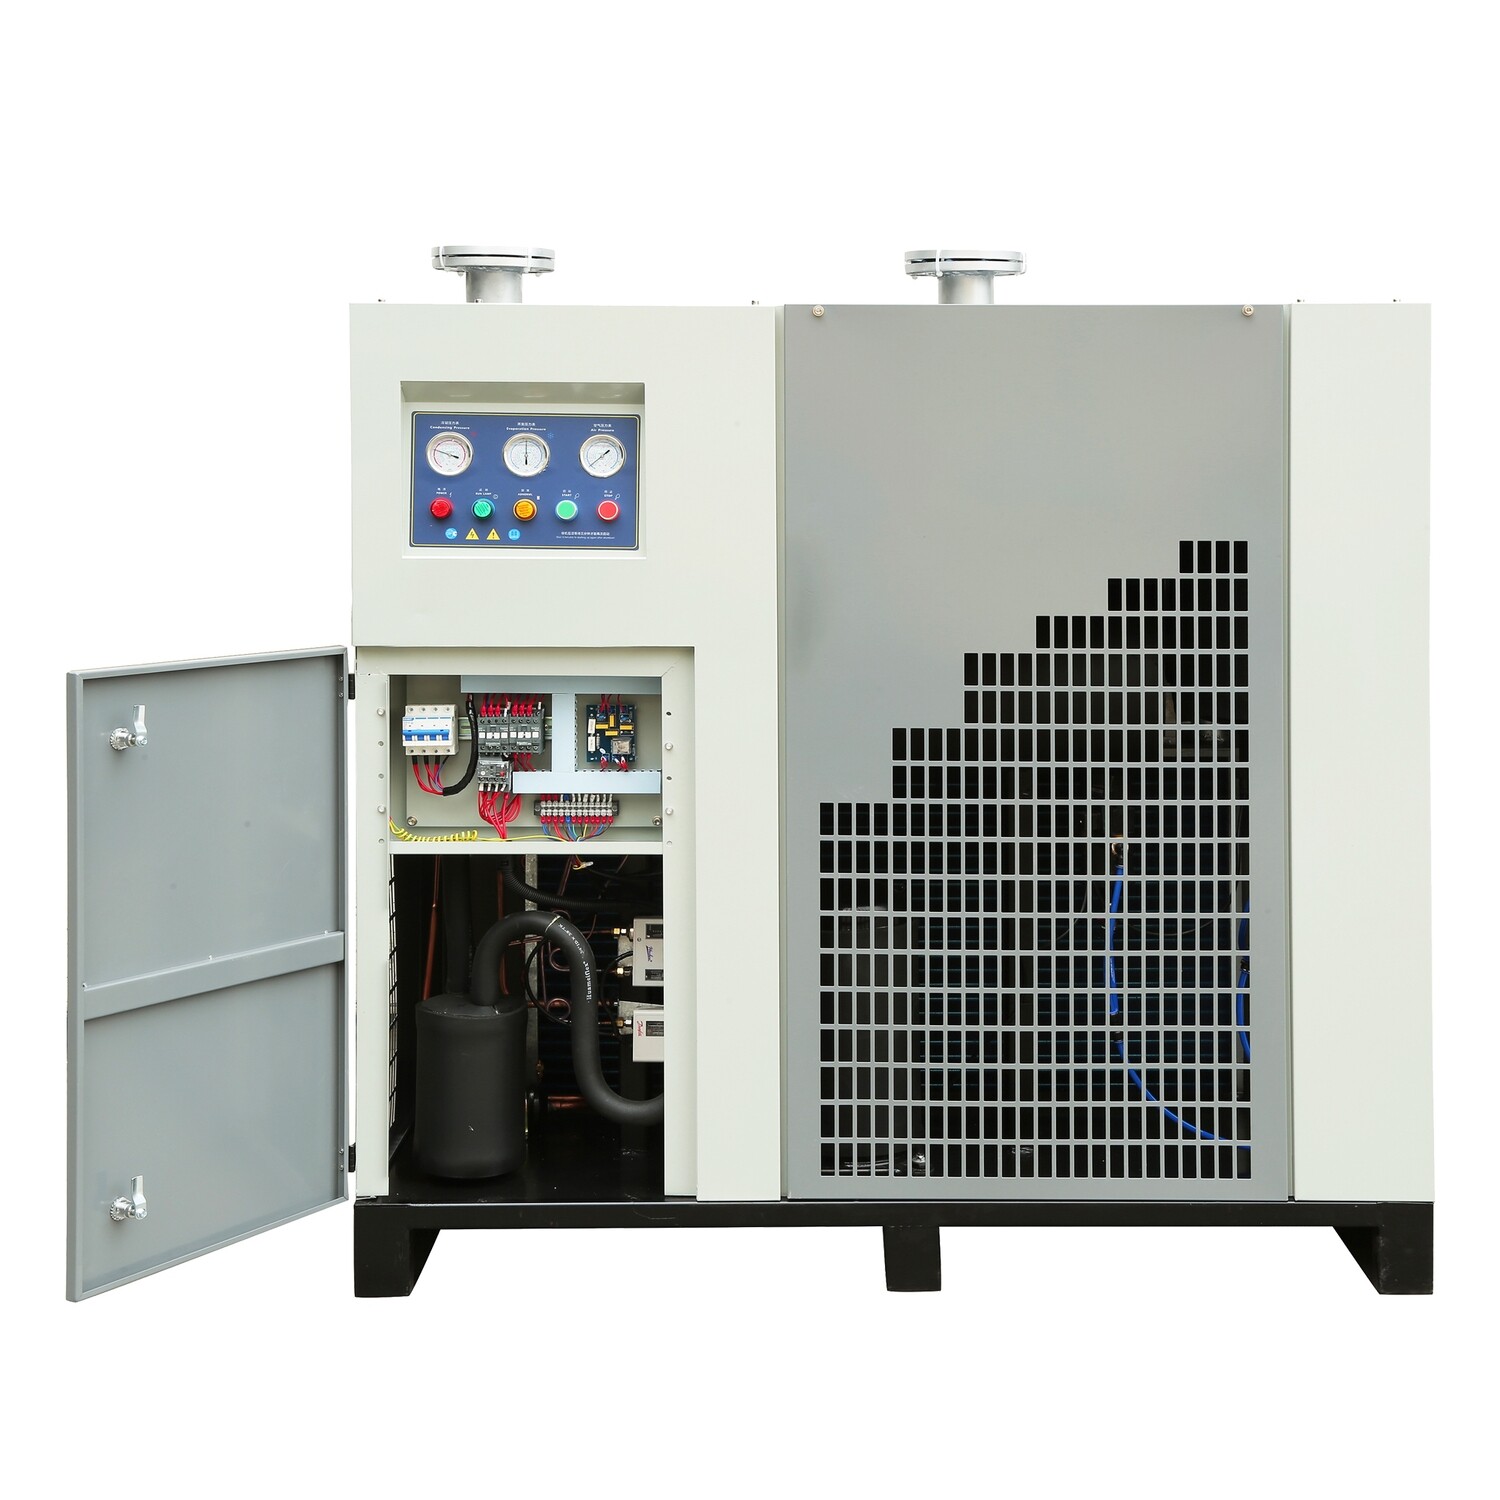 6.5m³/min refrigerated air dryer for compressed air